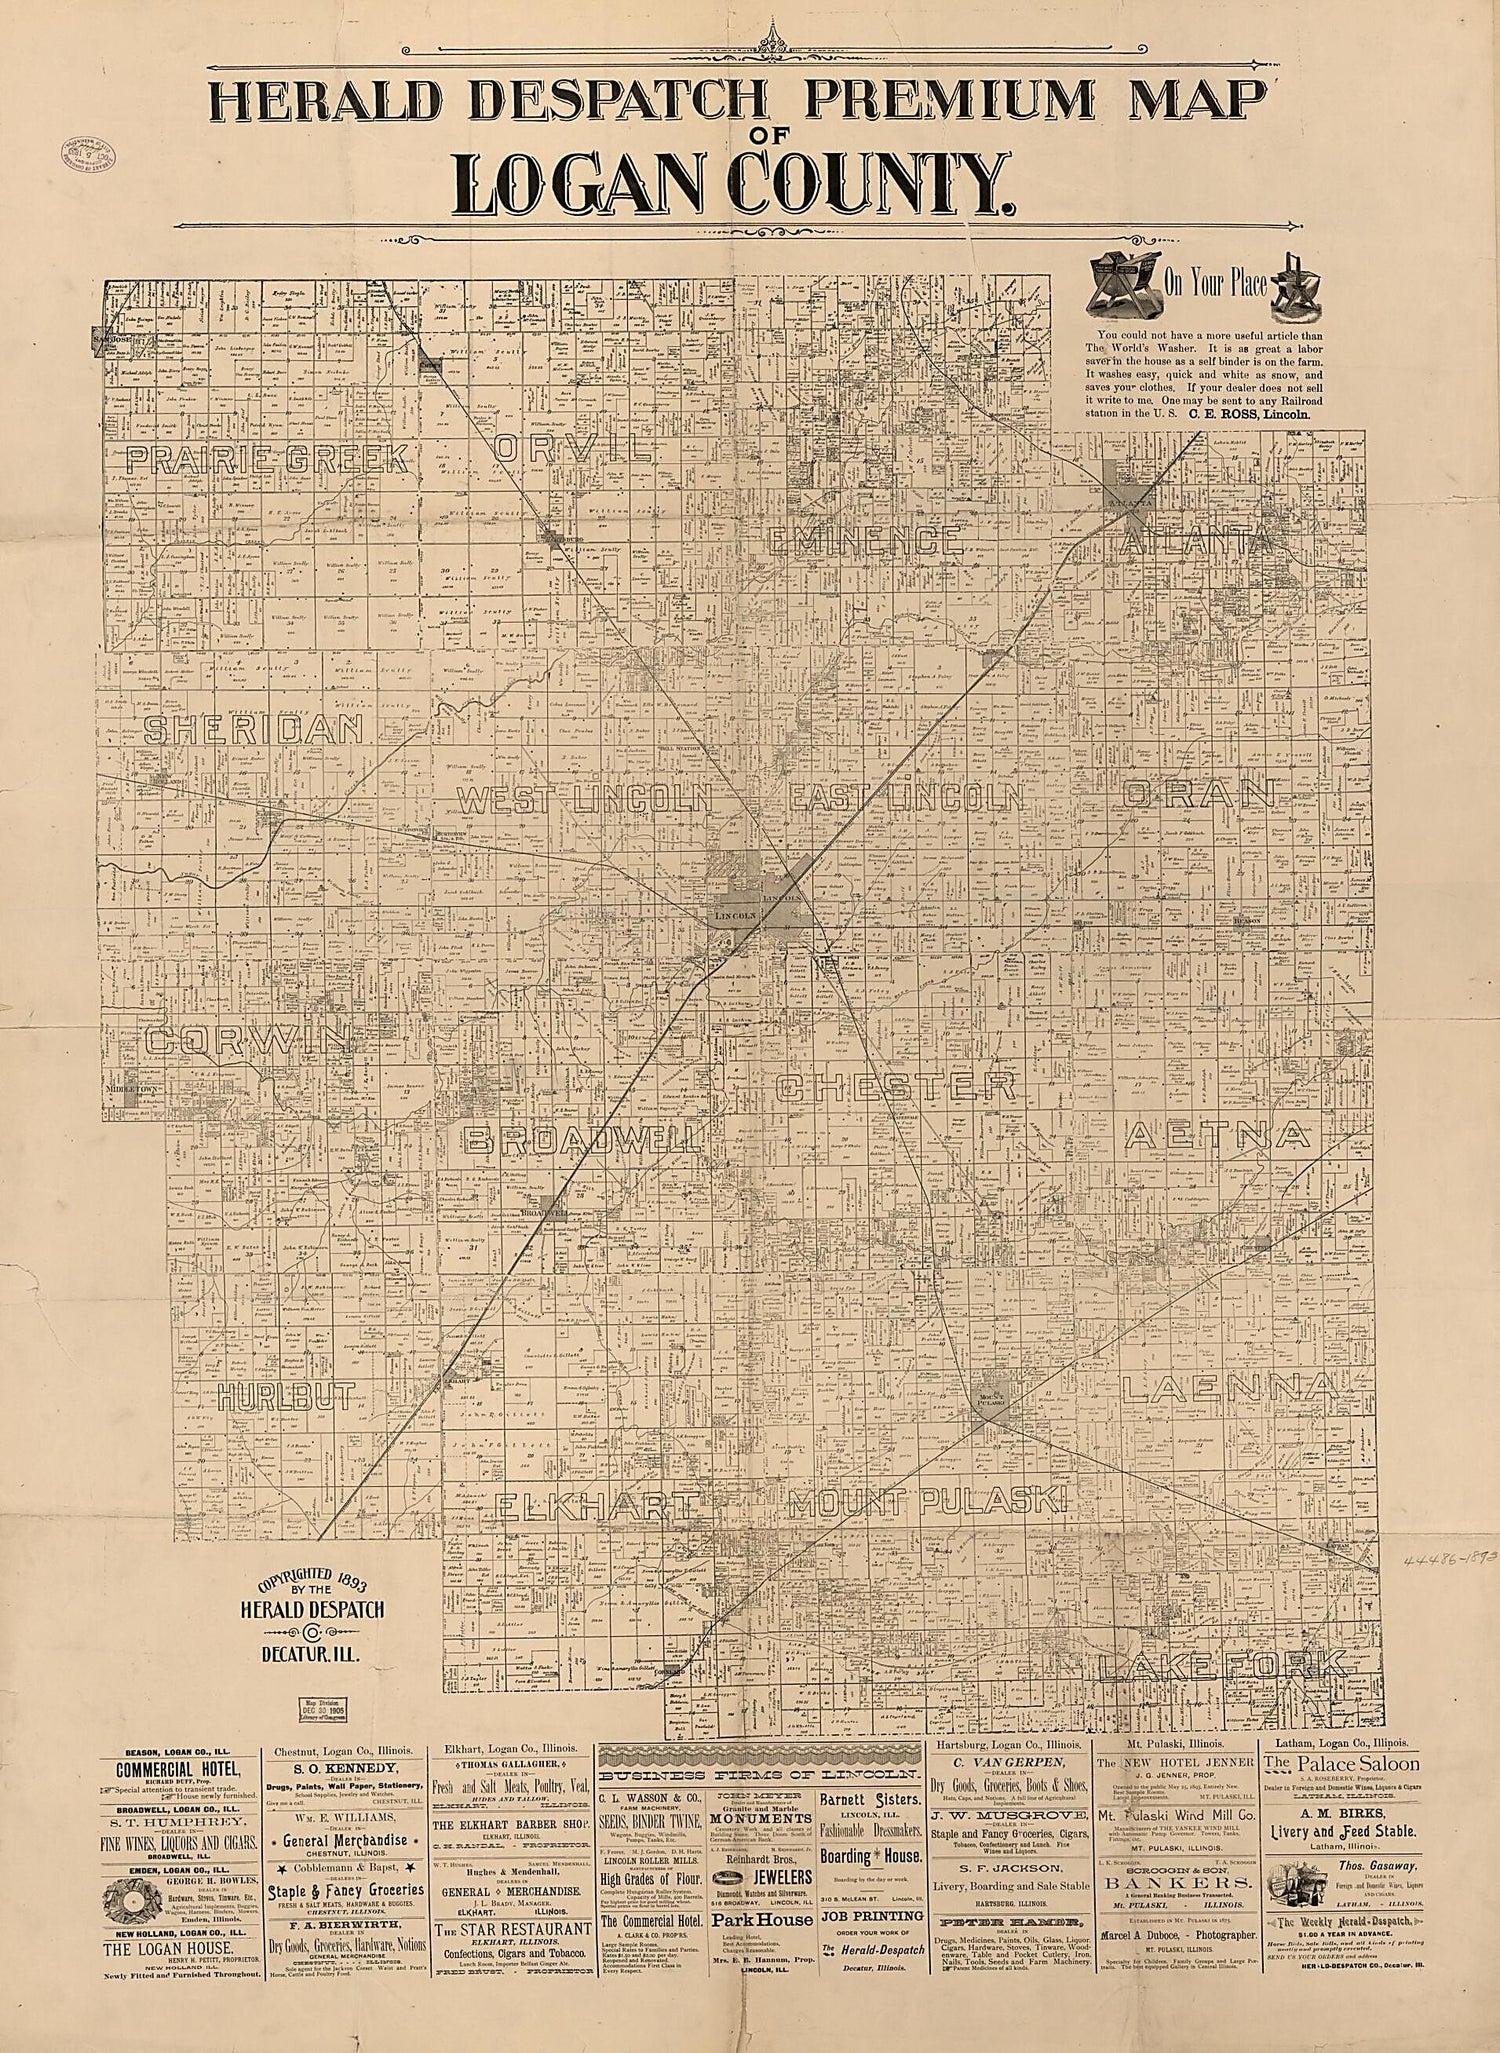 This old map of Herald Despatch Premium Map of Logan County from 1861 was created by  Herald Despatch Co in 1861